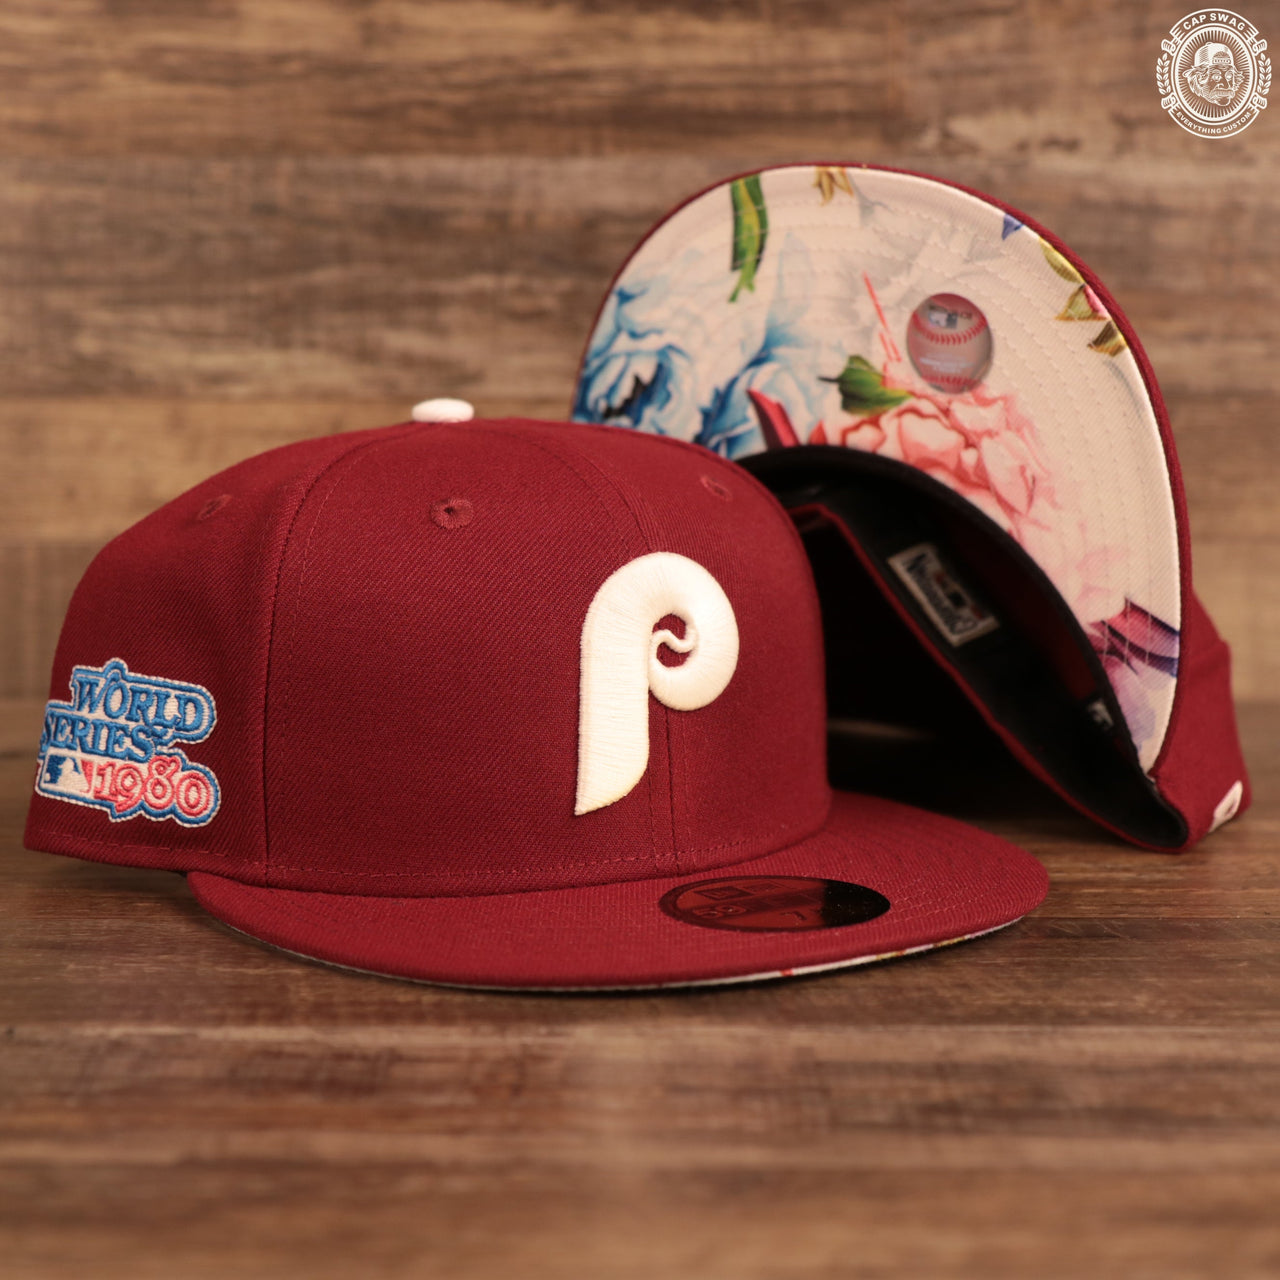 The glow in the dark Phillies floral underbrim 59fifty fitted cap by New Era.